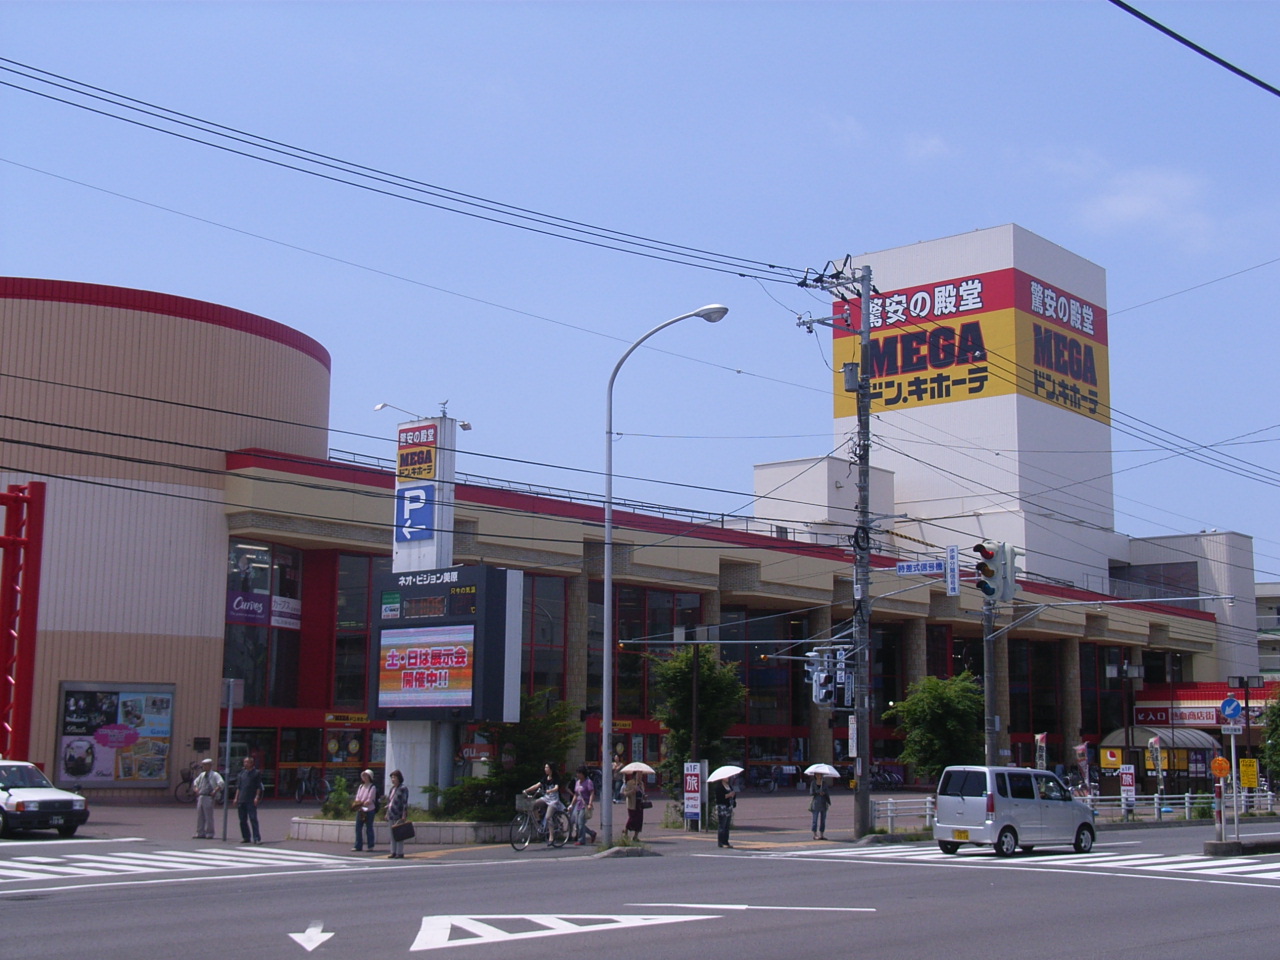 Shopping centre. MEGA Don ・ 1607m until Quijote Hakodate store (shopping center)